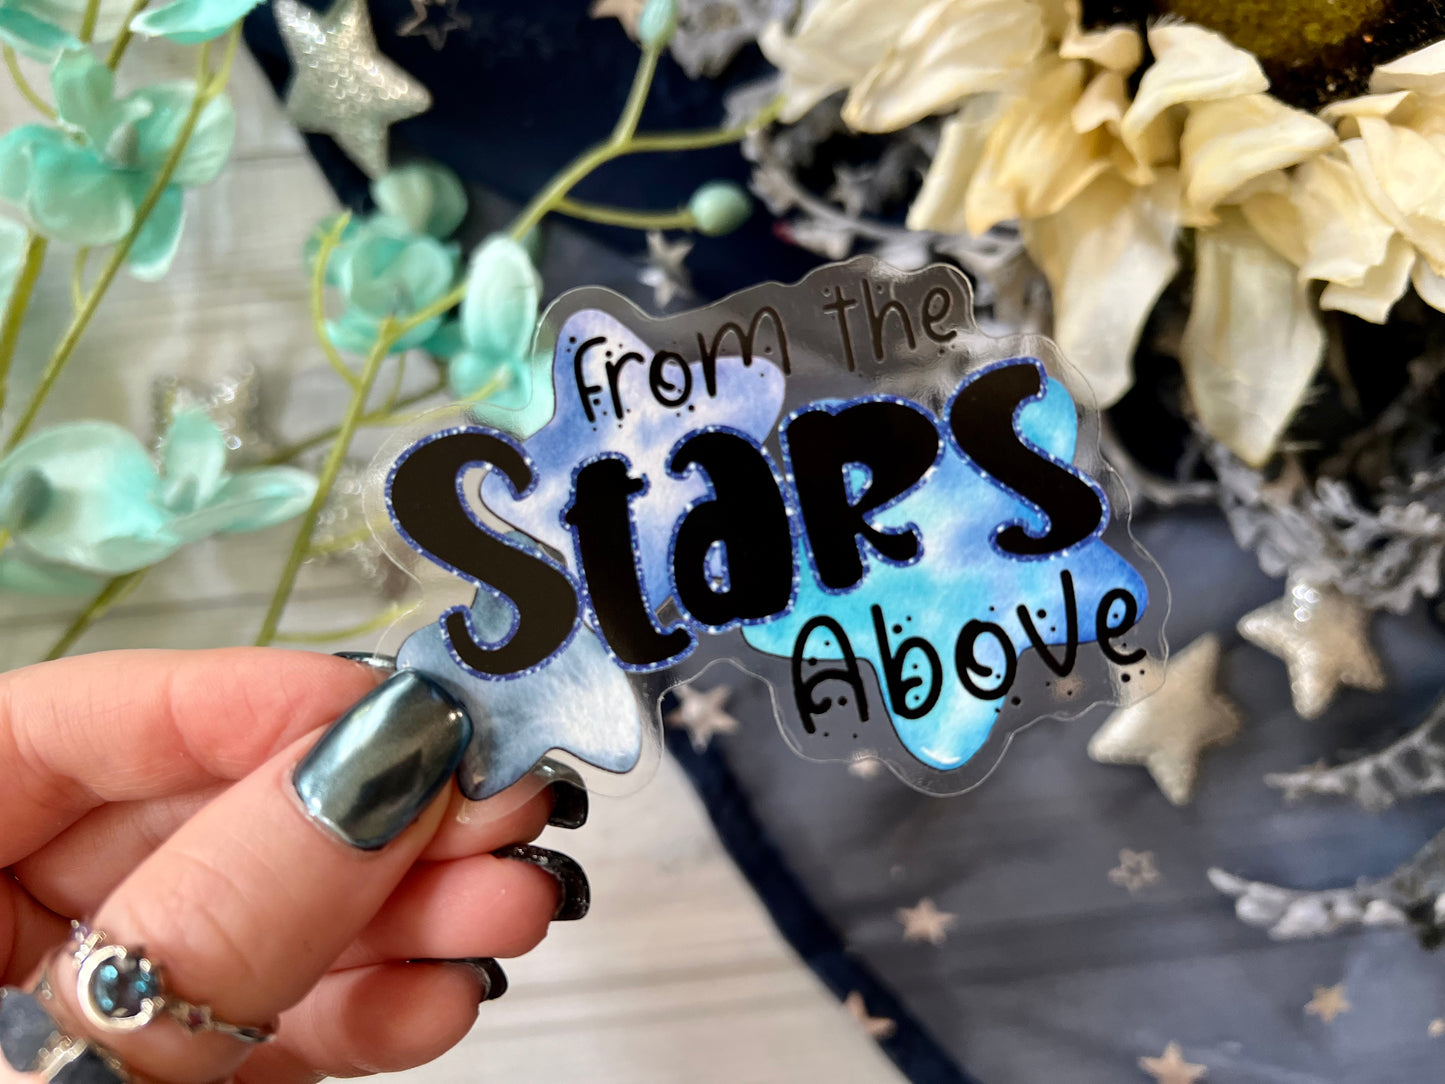 *Reward Only!* From the Stars Above* (Logo) - Translucent Sticker